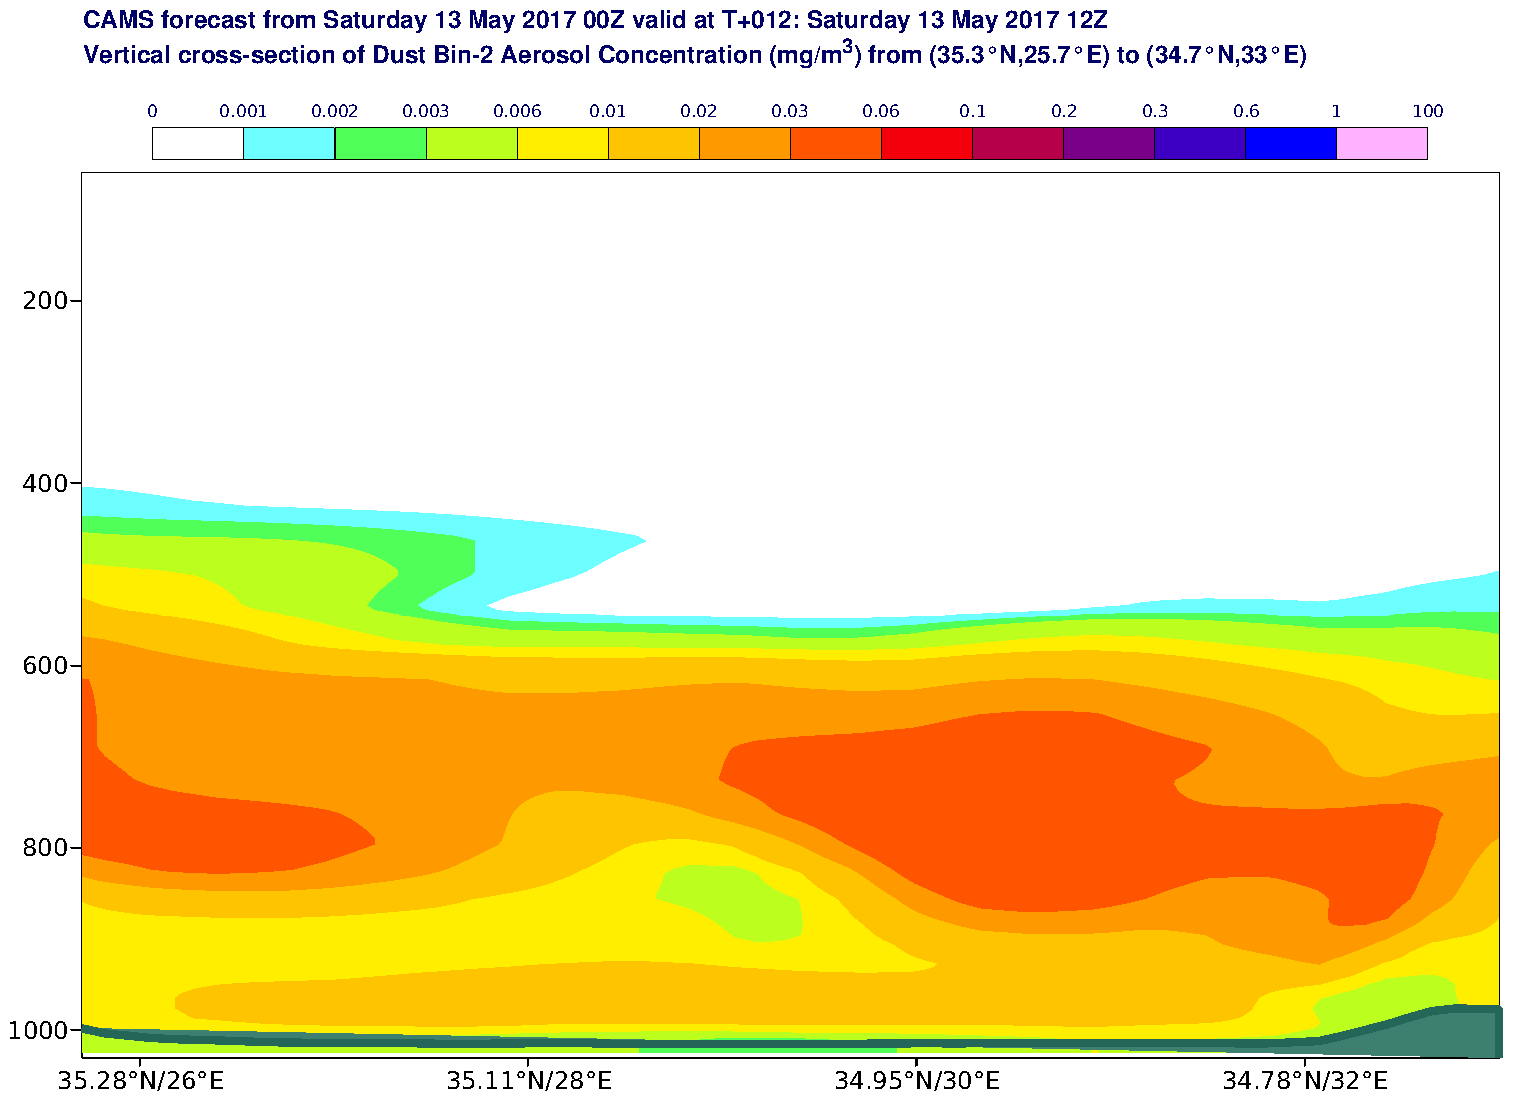 Vertical cross-section of Dust Bin-2 Aerosol Concentration (mg/m3) valid at T12 - 2017-05-13 12:00